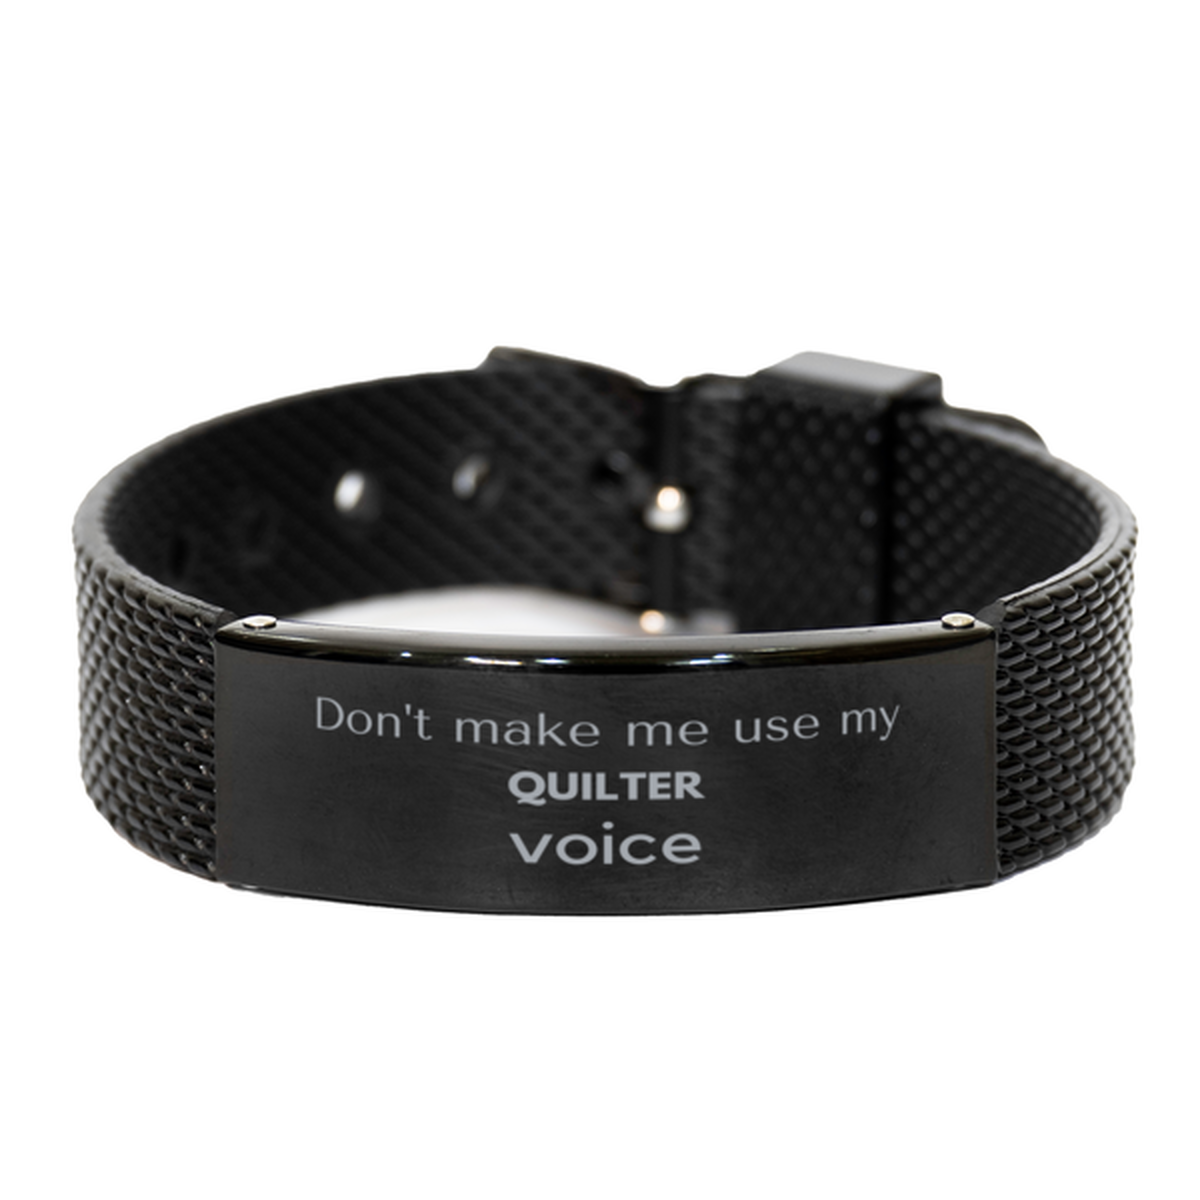 Don't make me use my Quilter voice, Sarcasm Quilter Gifts, Christmas Quilter Black Shark Mesh Bracelet Birthday Unique Gifts For Quilter Coworkers, Men, Women, Colleague, Friends